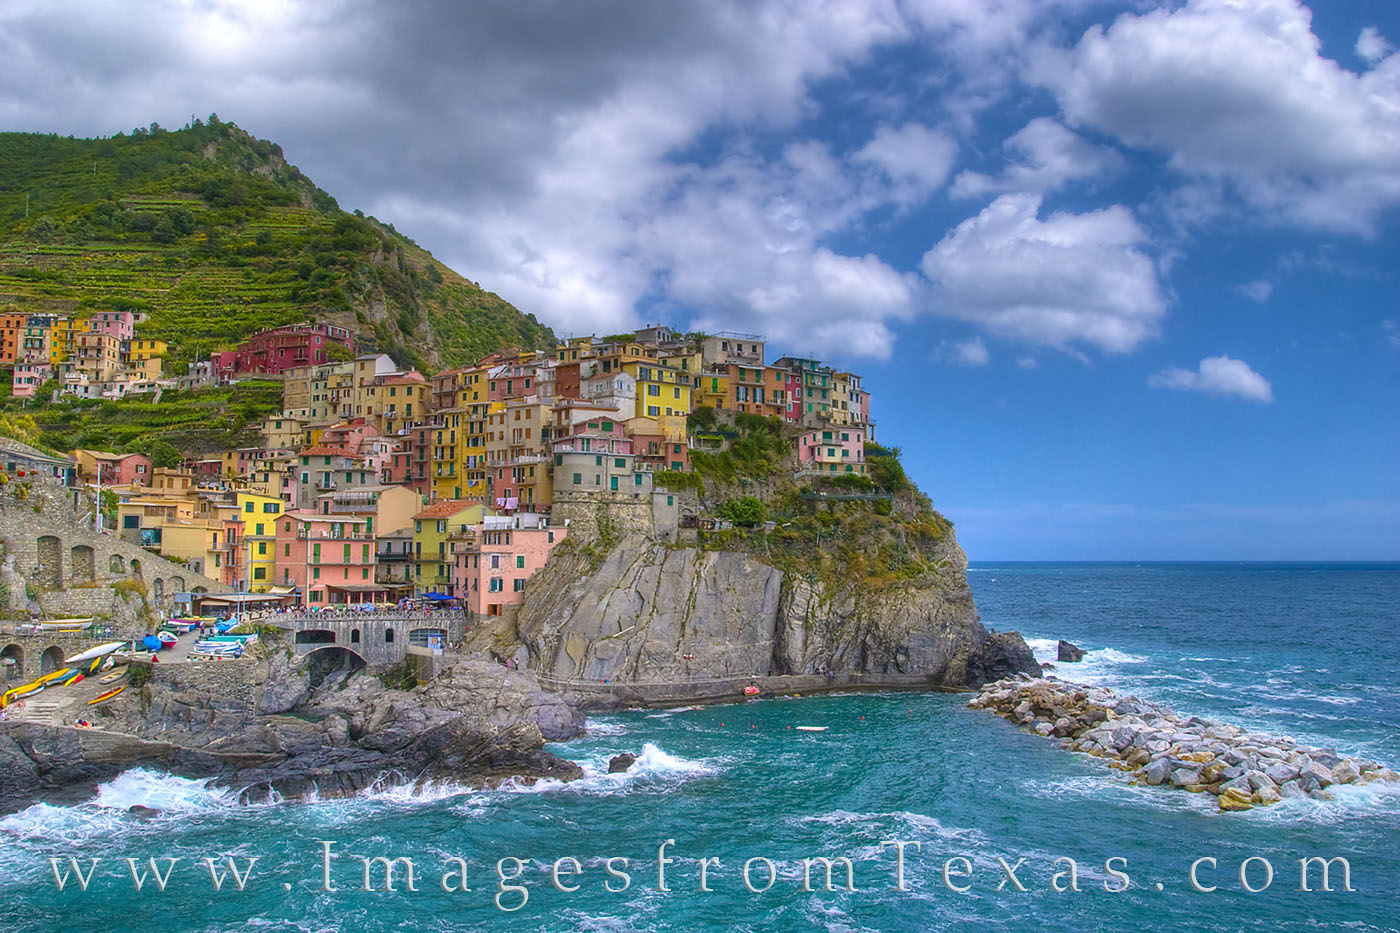 The late morning in Manarola, Italy, finds soft clouds floating across this sleepy village along the Italian Riveria. One of...